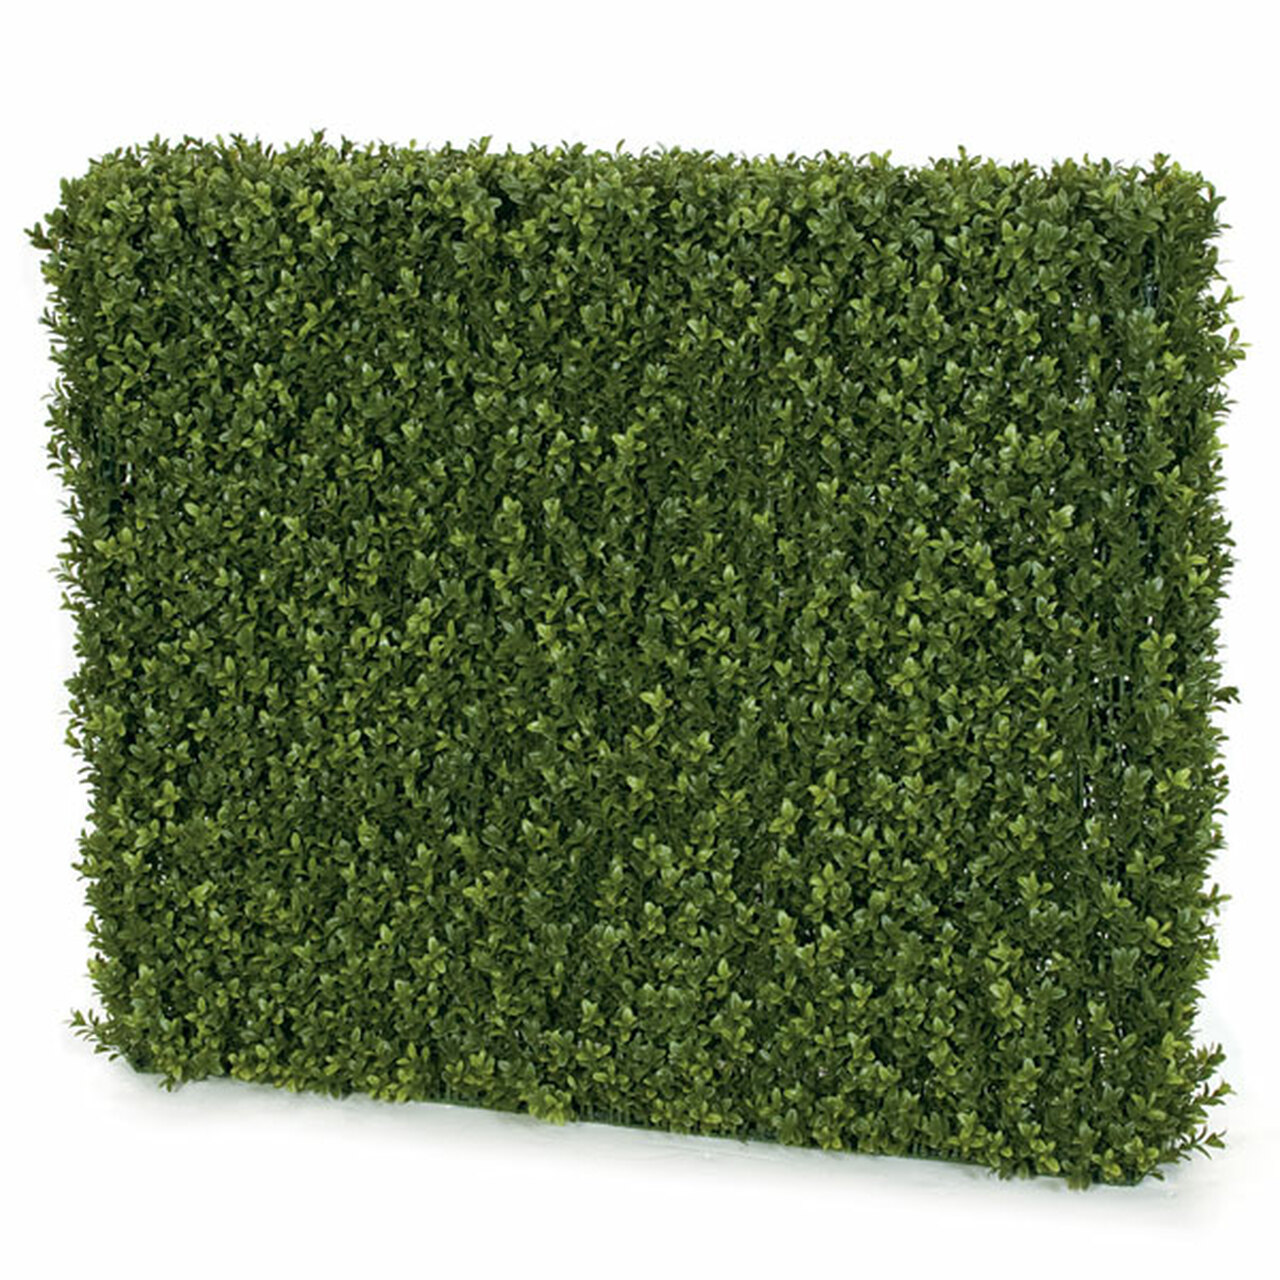 37 Inch L and 8 Inch W and 32 Inch H Outdoor Ultraviolet (UV) Boxwood Hedge